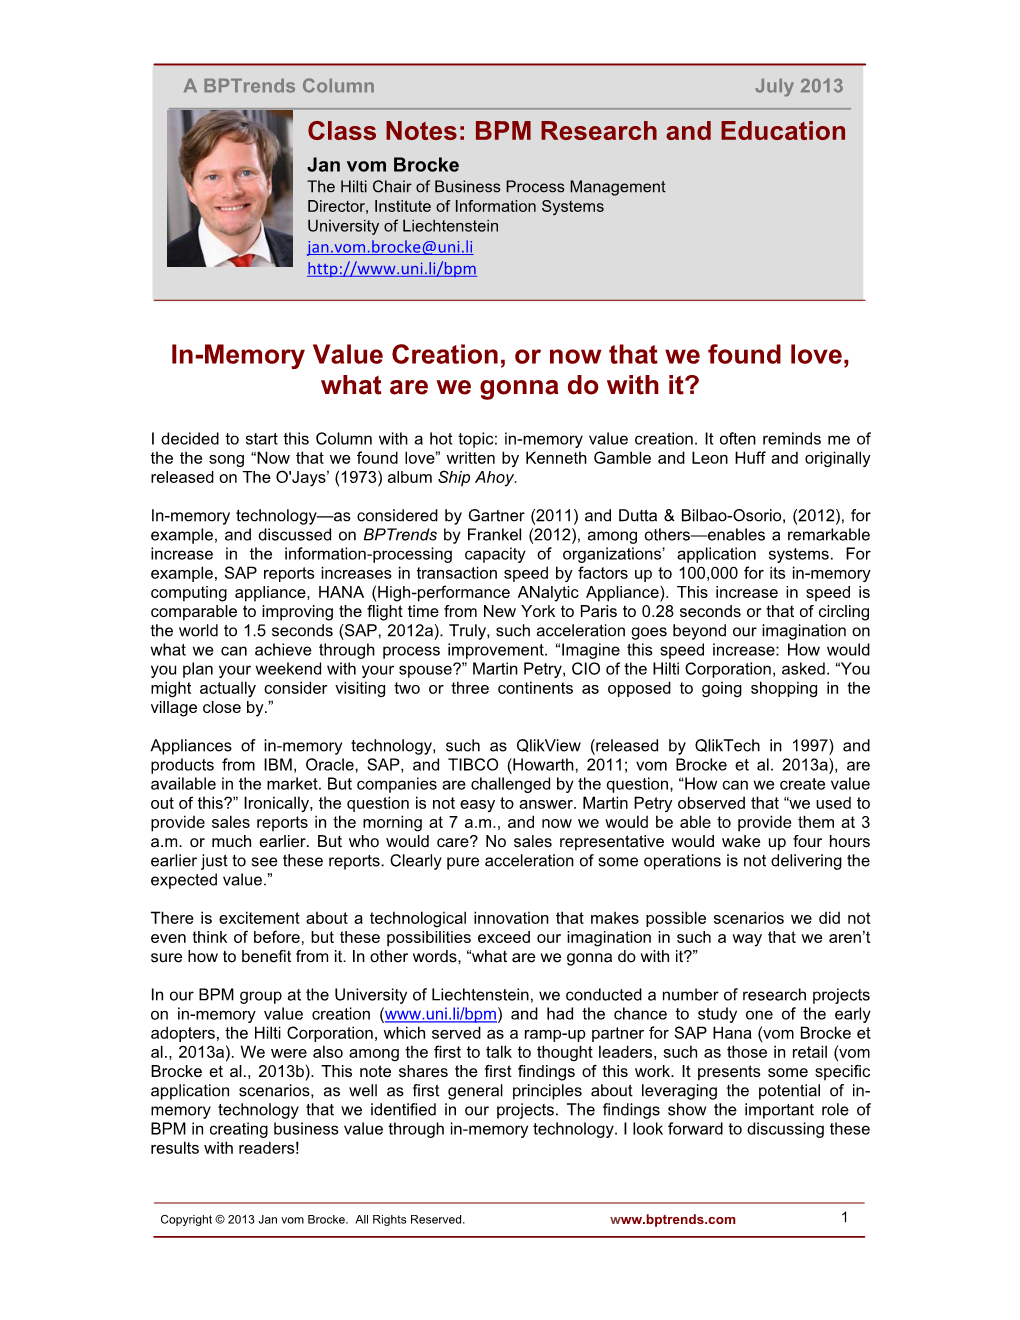 In-Memory Value Creation, Or Now That We Found Love, What Are We Gonna Do with It?